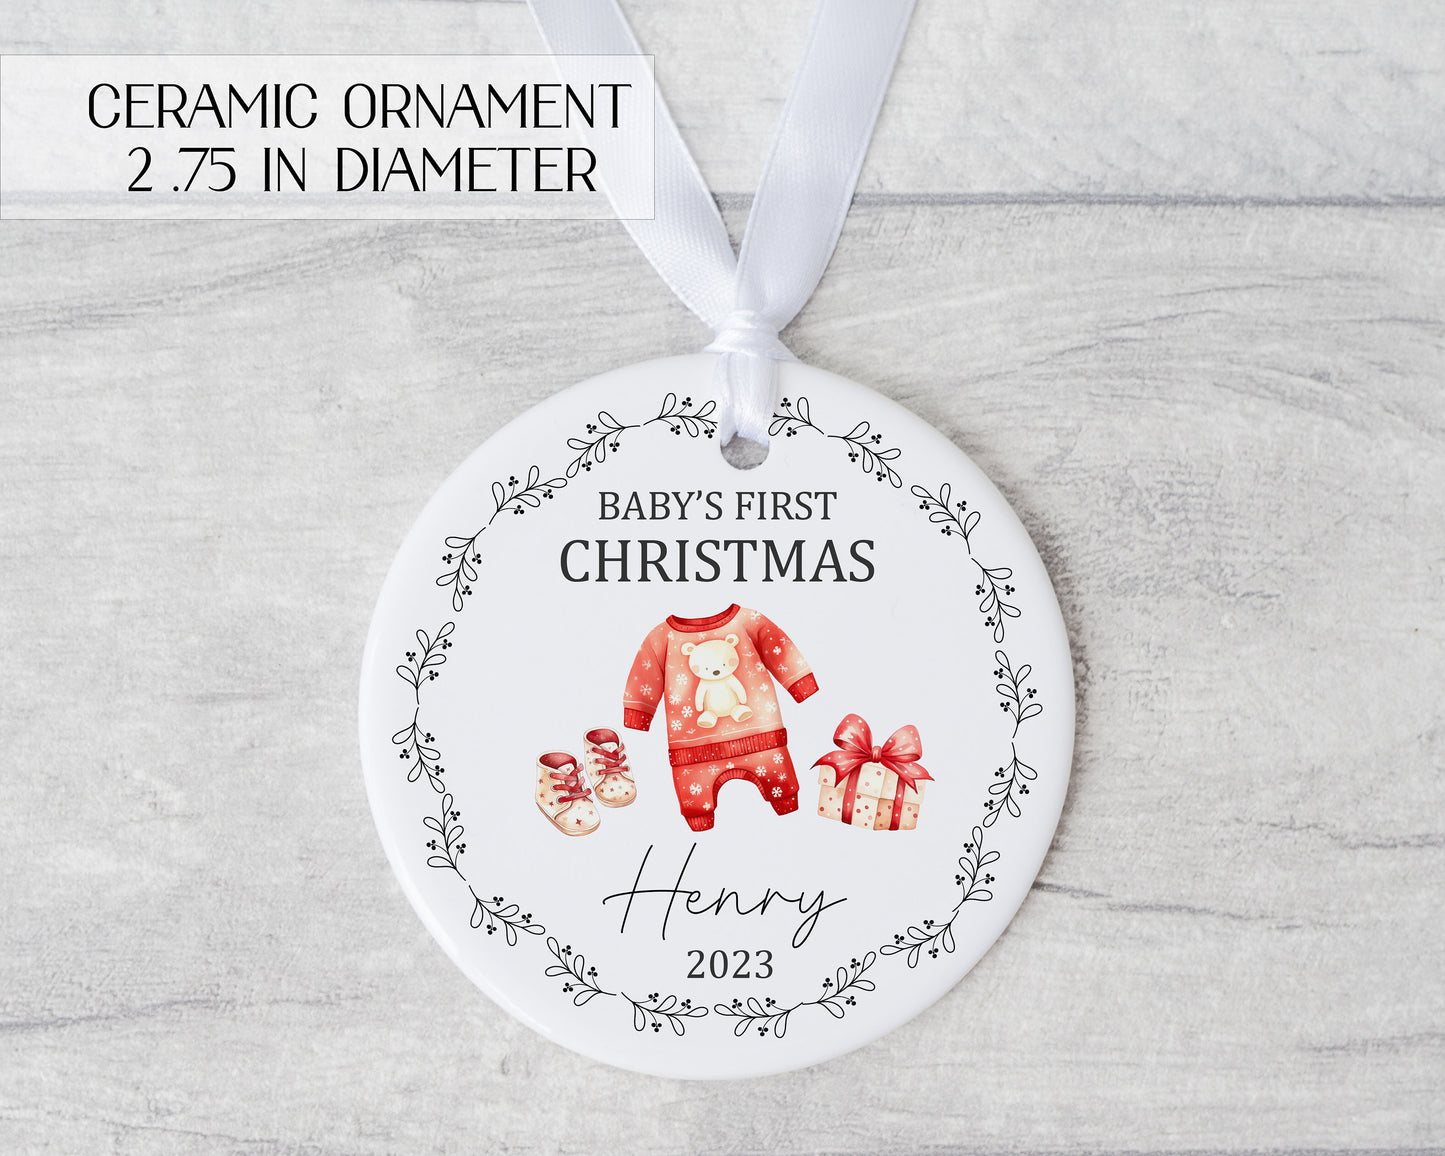 Babys first christmas ornament 2023 - babys 1st christmas ornament - new baby ornament - my first christmas ornament - first christmas baby